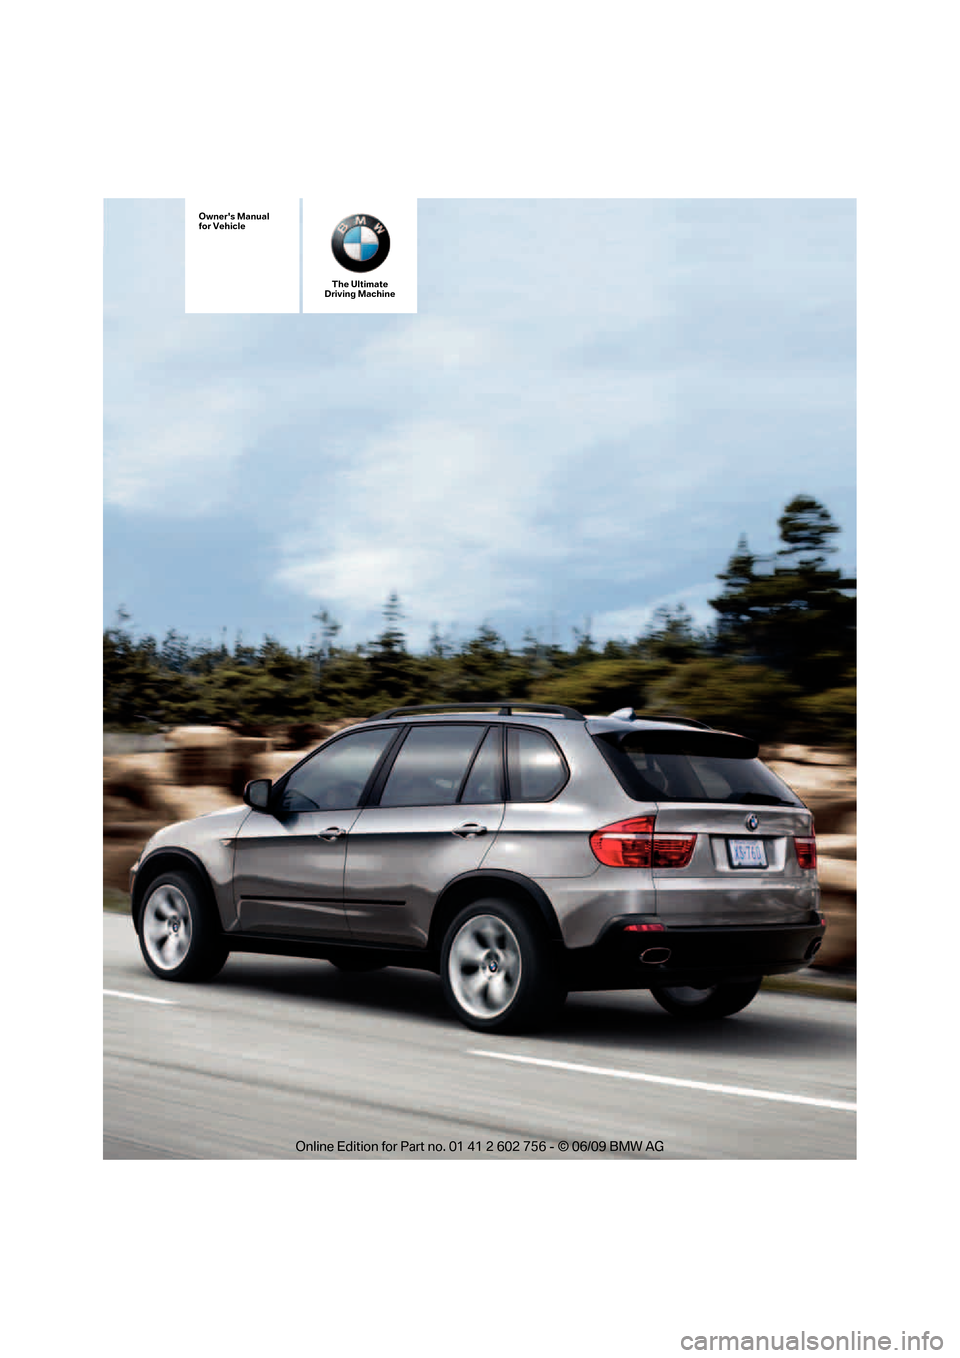 BMW X6 XDRIVE 35I 2010 E71 Owners Manual The Ultimate
Driving Machine
Owners Manual
for Vehicle
ba8_e70ag.book  Seite 1  Freitag, 5. Juni 2009  11:42 11 